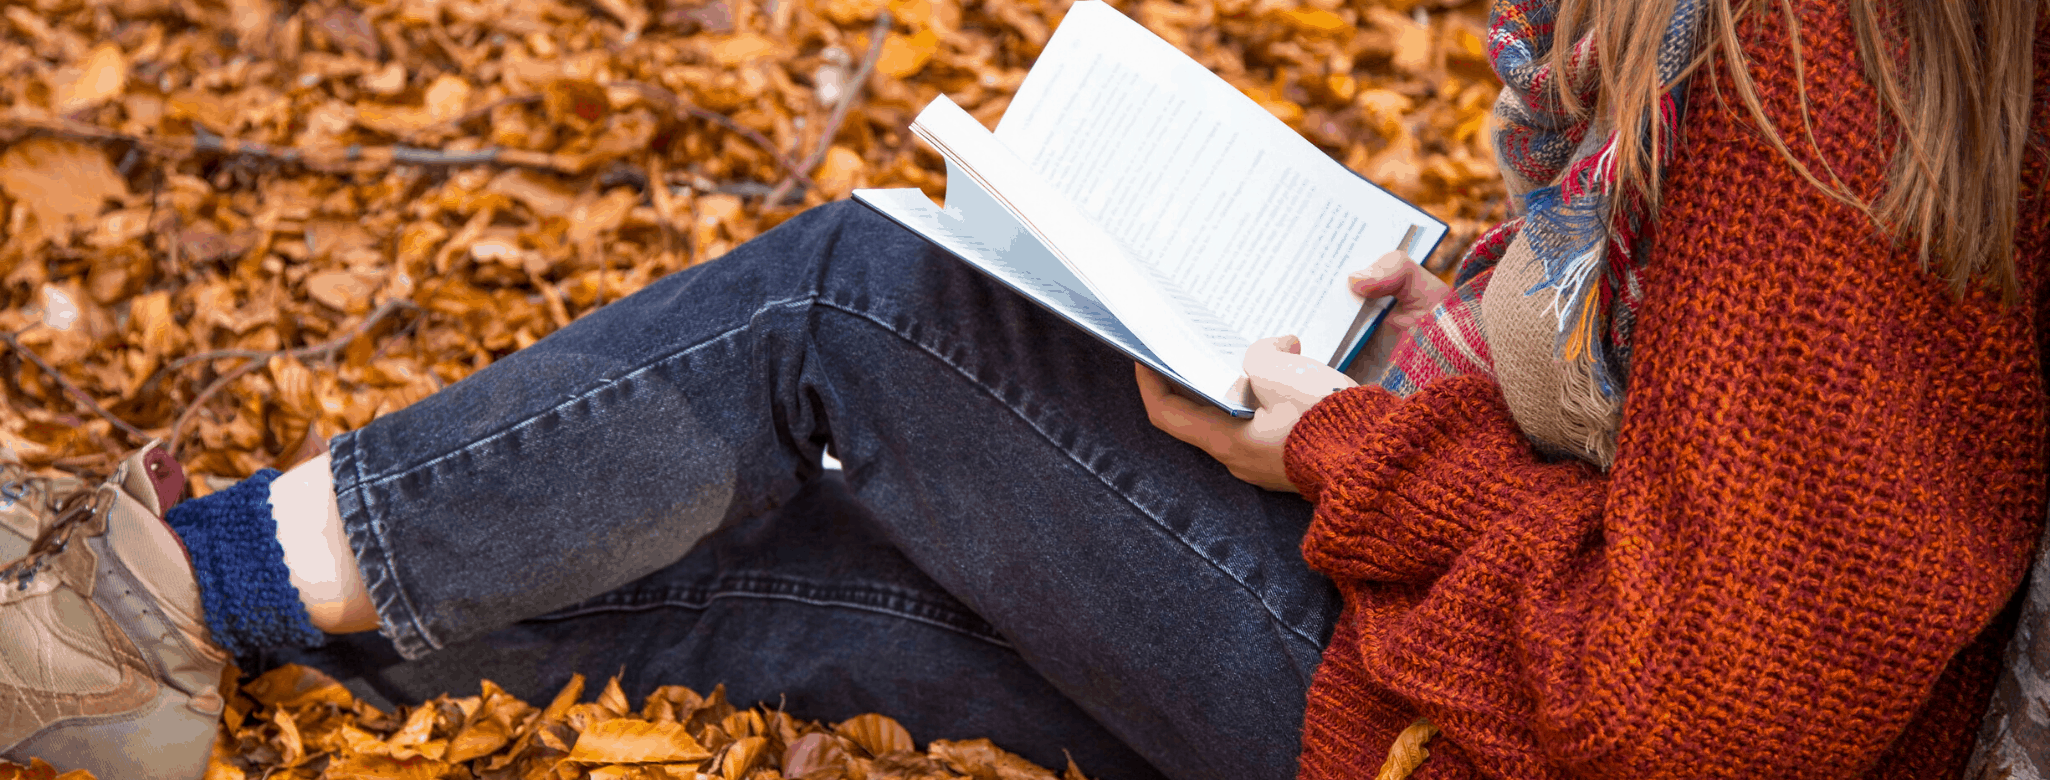 Fall Reading Guide 2020